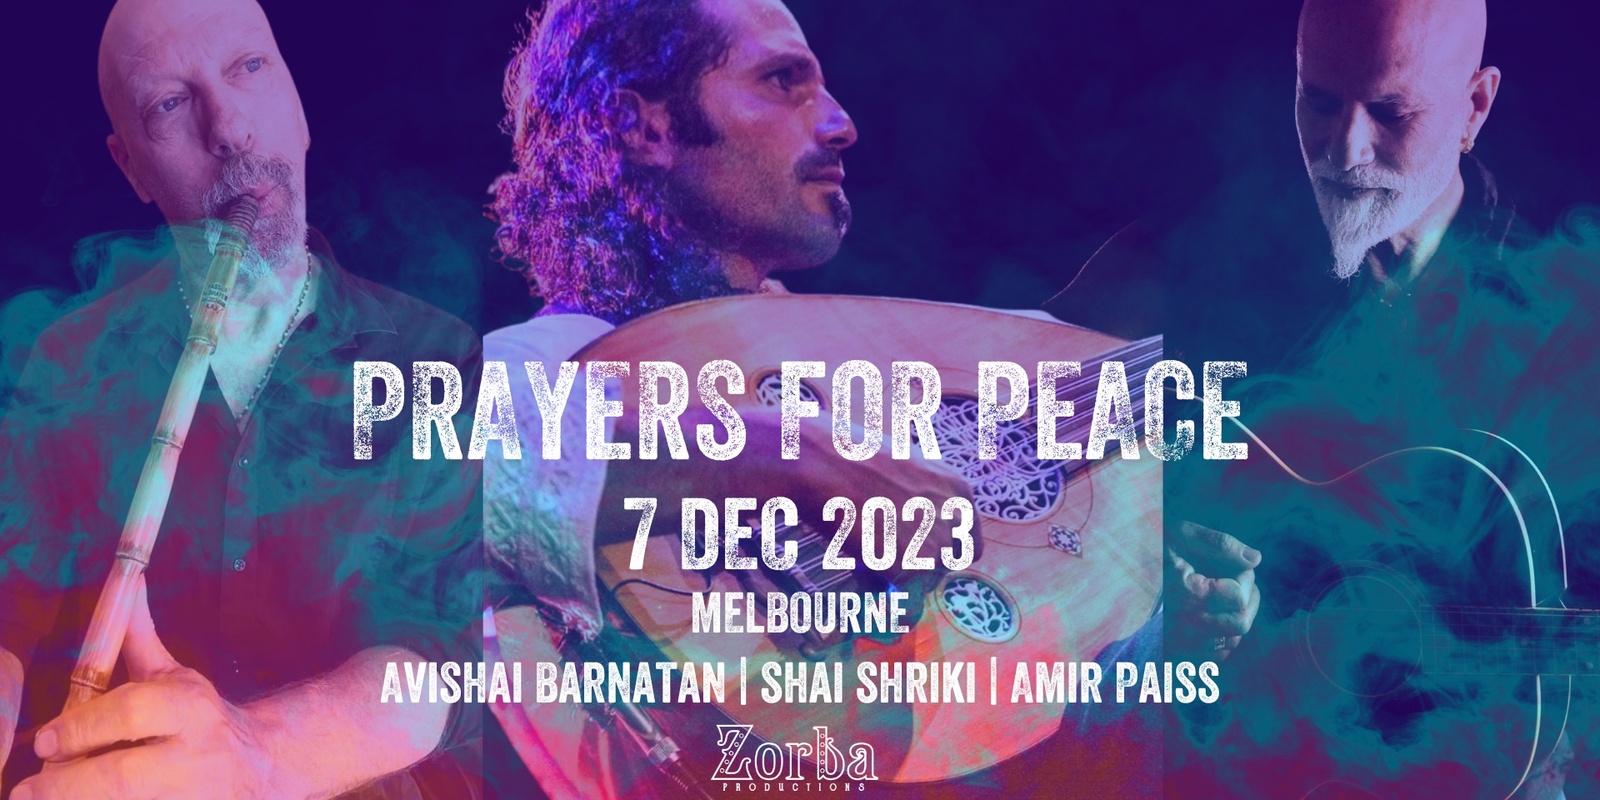 Banner image for Prayers For Peace - MELBOURNE 7 DEC 2023